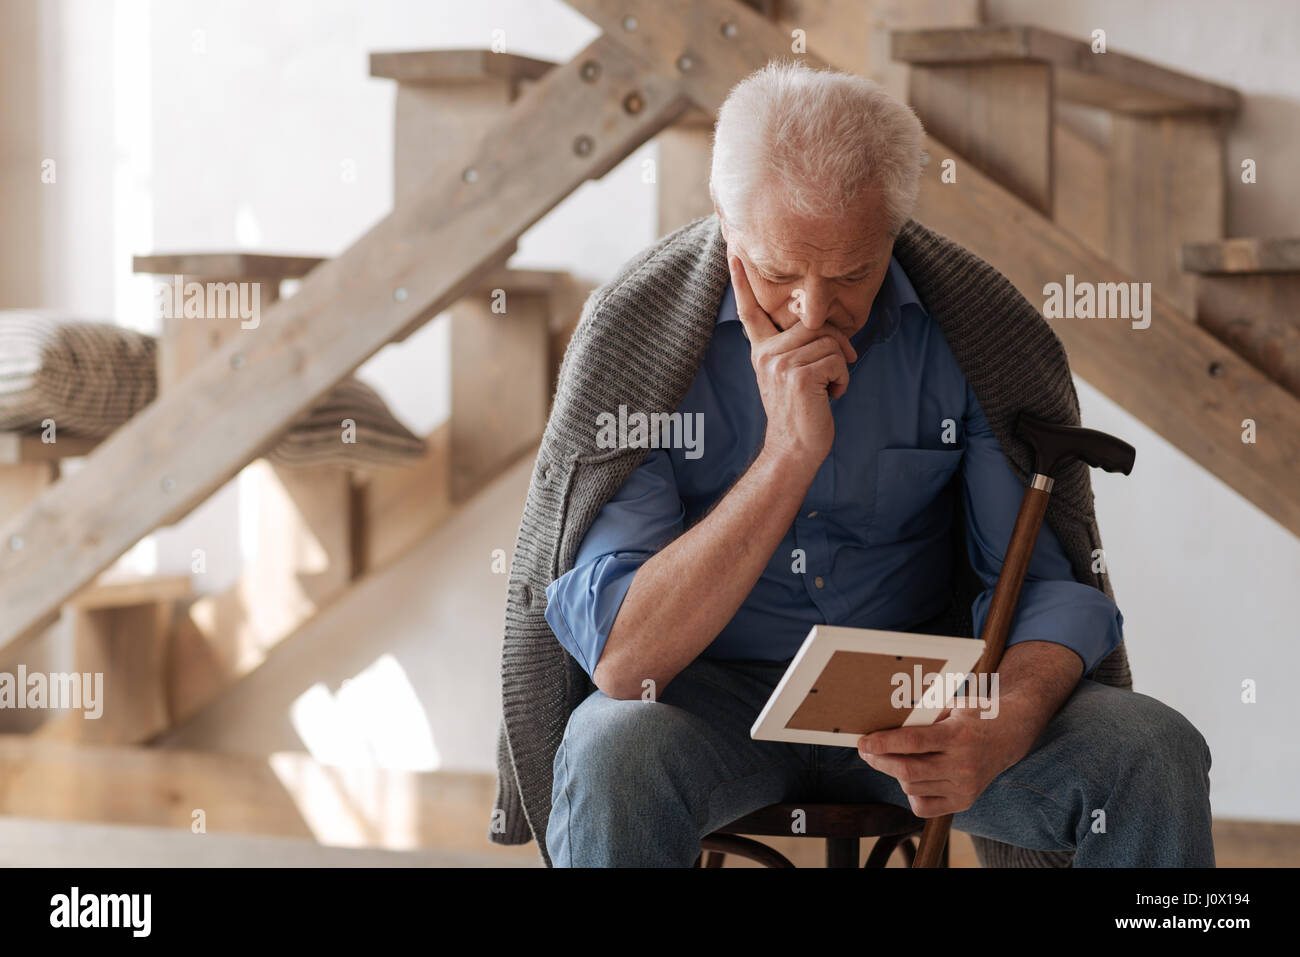 I Am So Alone Thoughtful Sad Nice Man Sitting Thoughtfully And Looking At The Photo While Missing His Wife Stock Photo Alamy